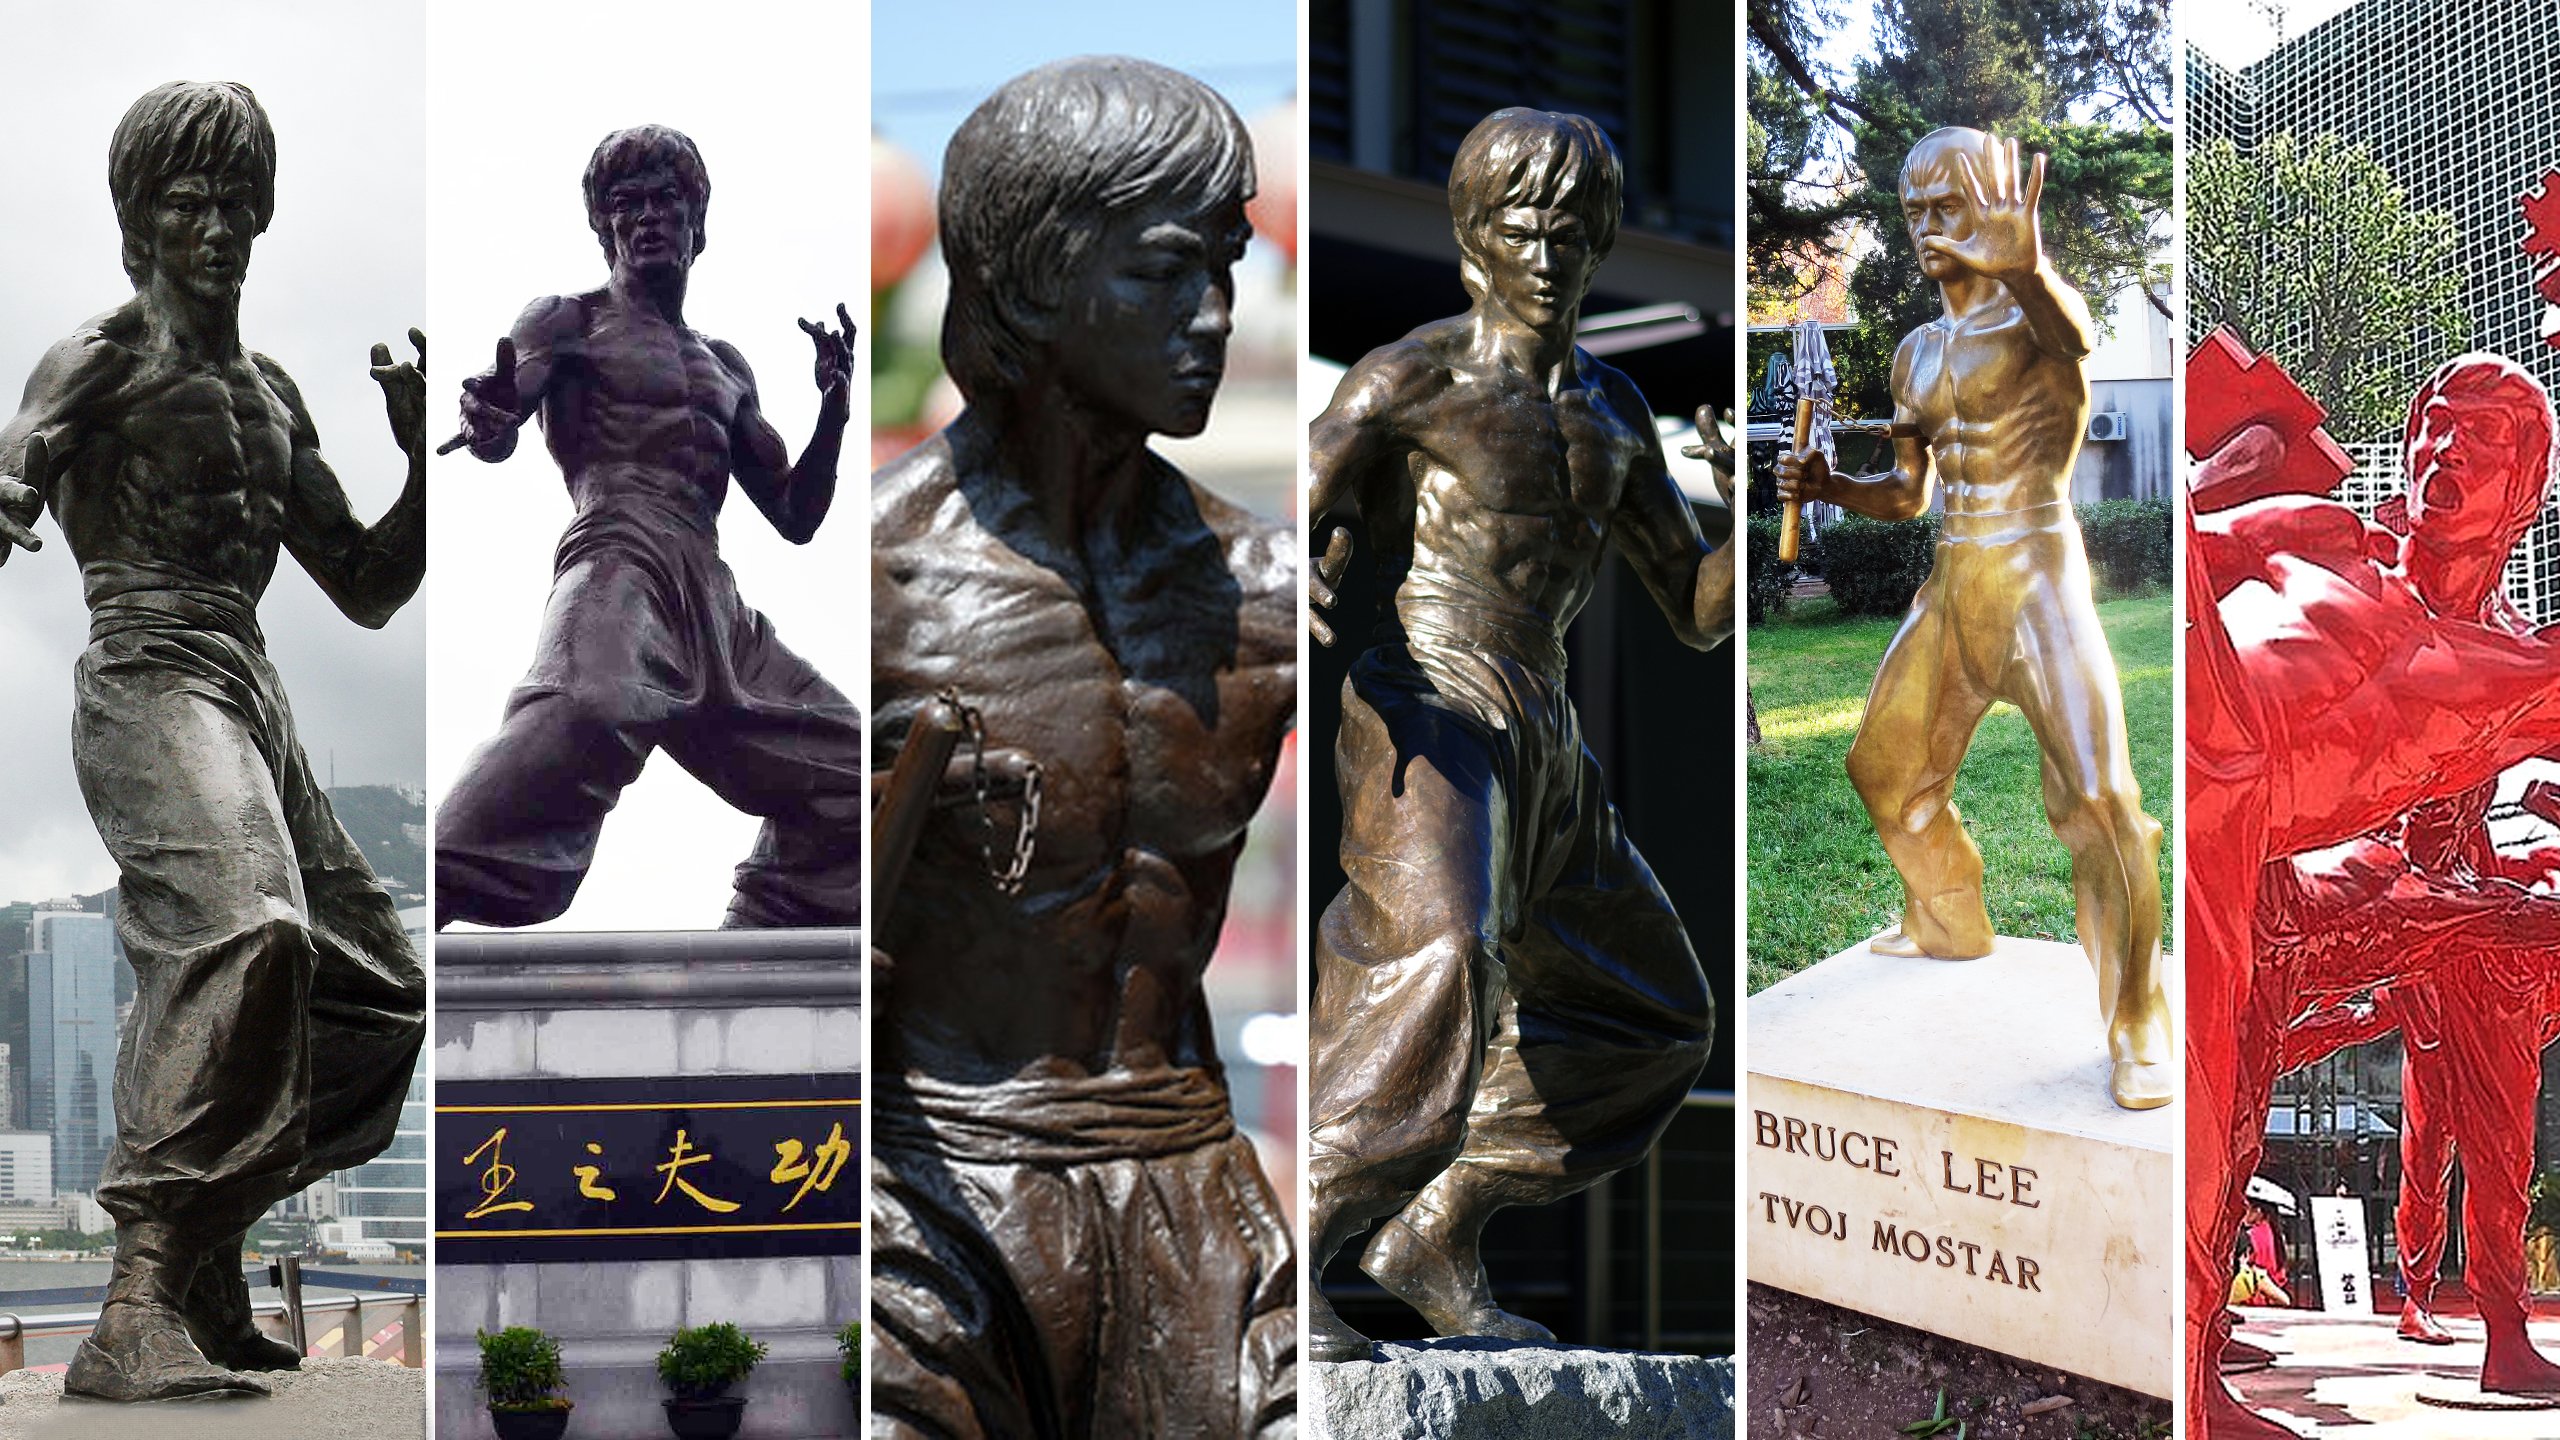 Bruce Lee's last stand: statues honour the kung fu star around the world |  South China Morning Post